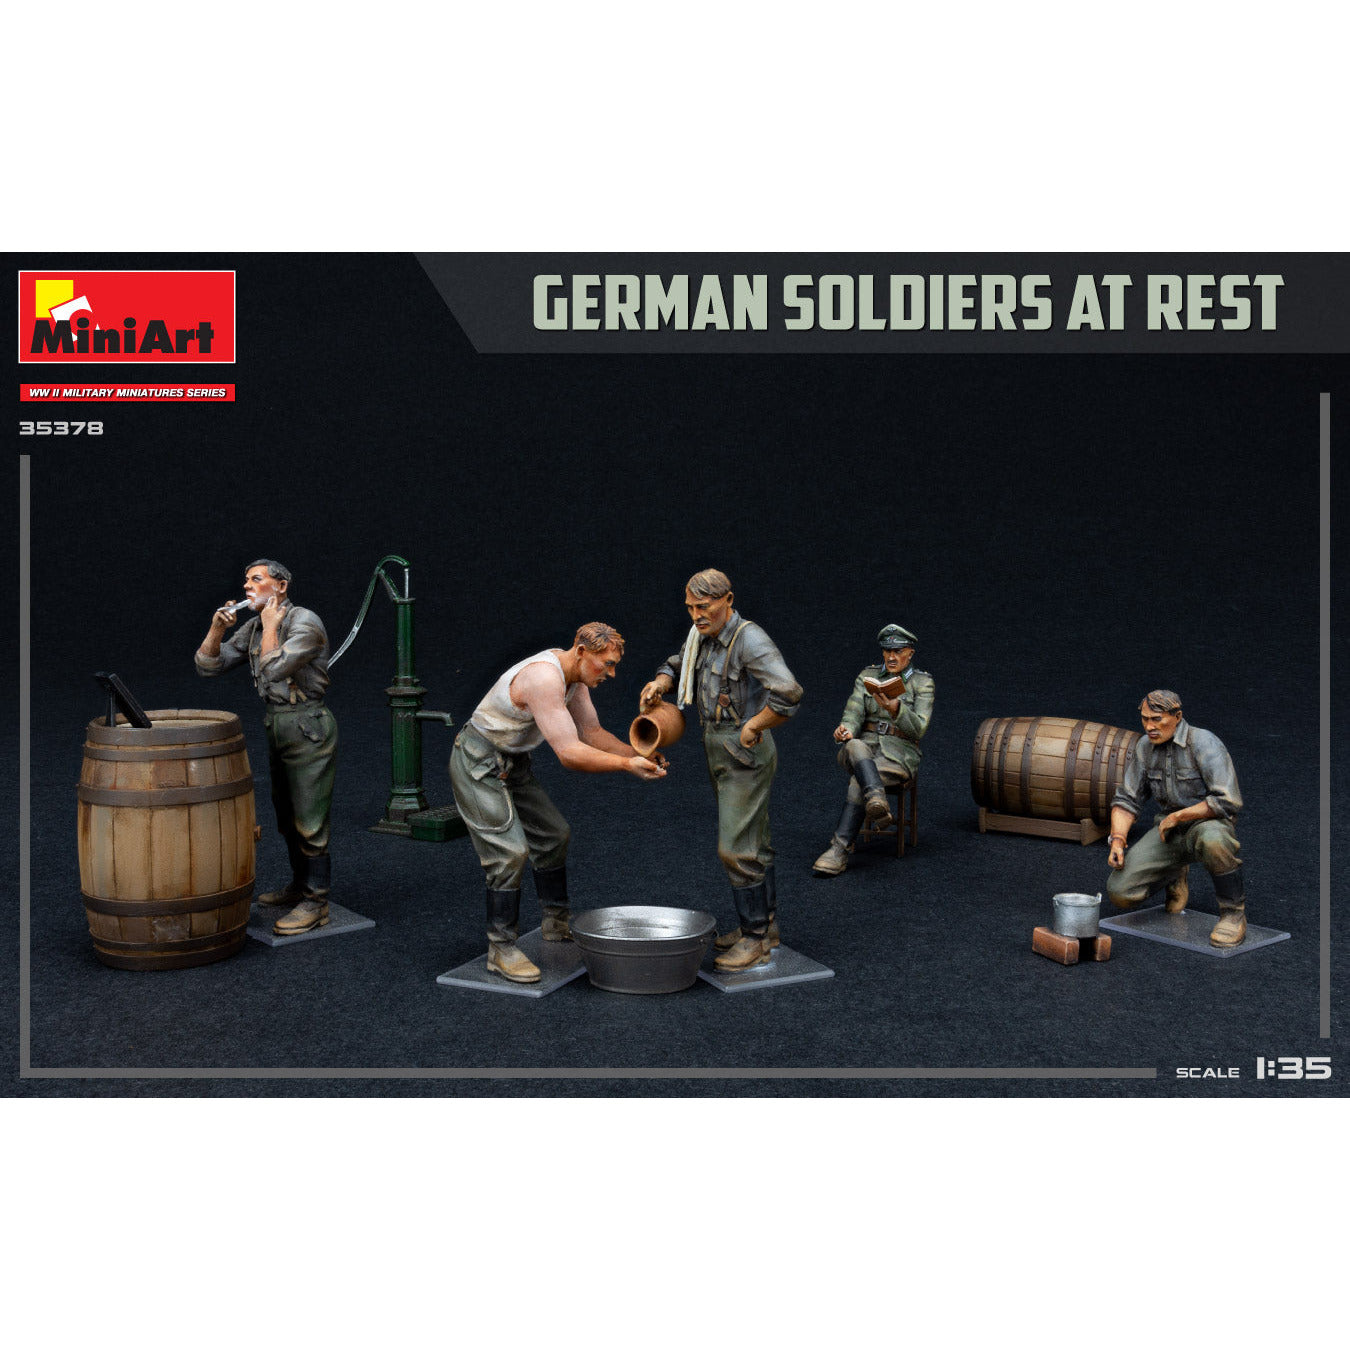 MINIART 1/35 German Soldiers at Rest